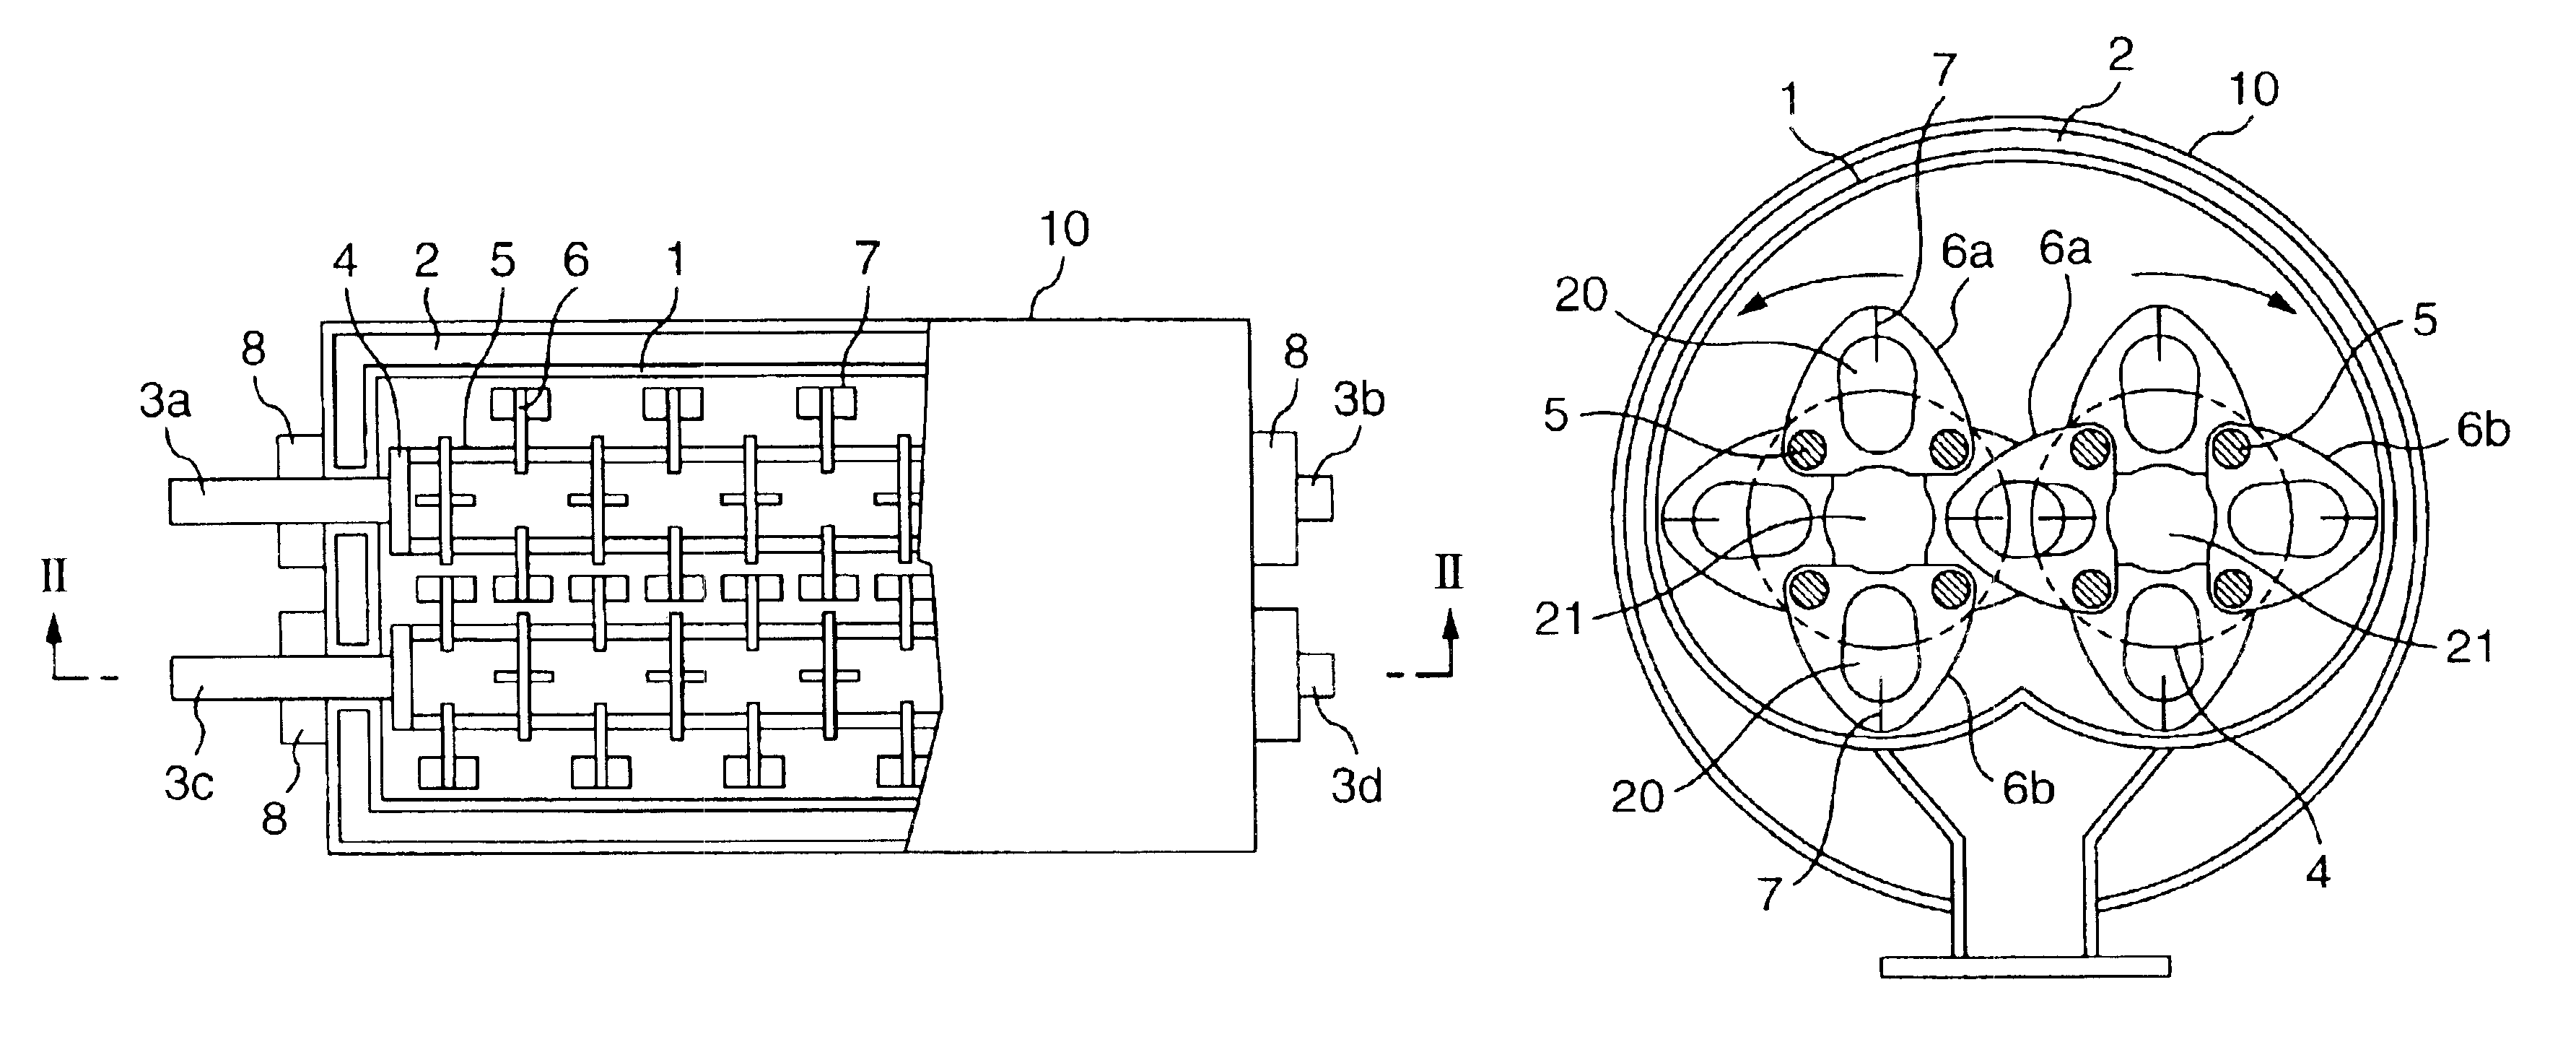 Apparatus for continuous stirring and process for continuous polycondensation of polymer resin